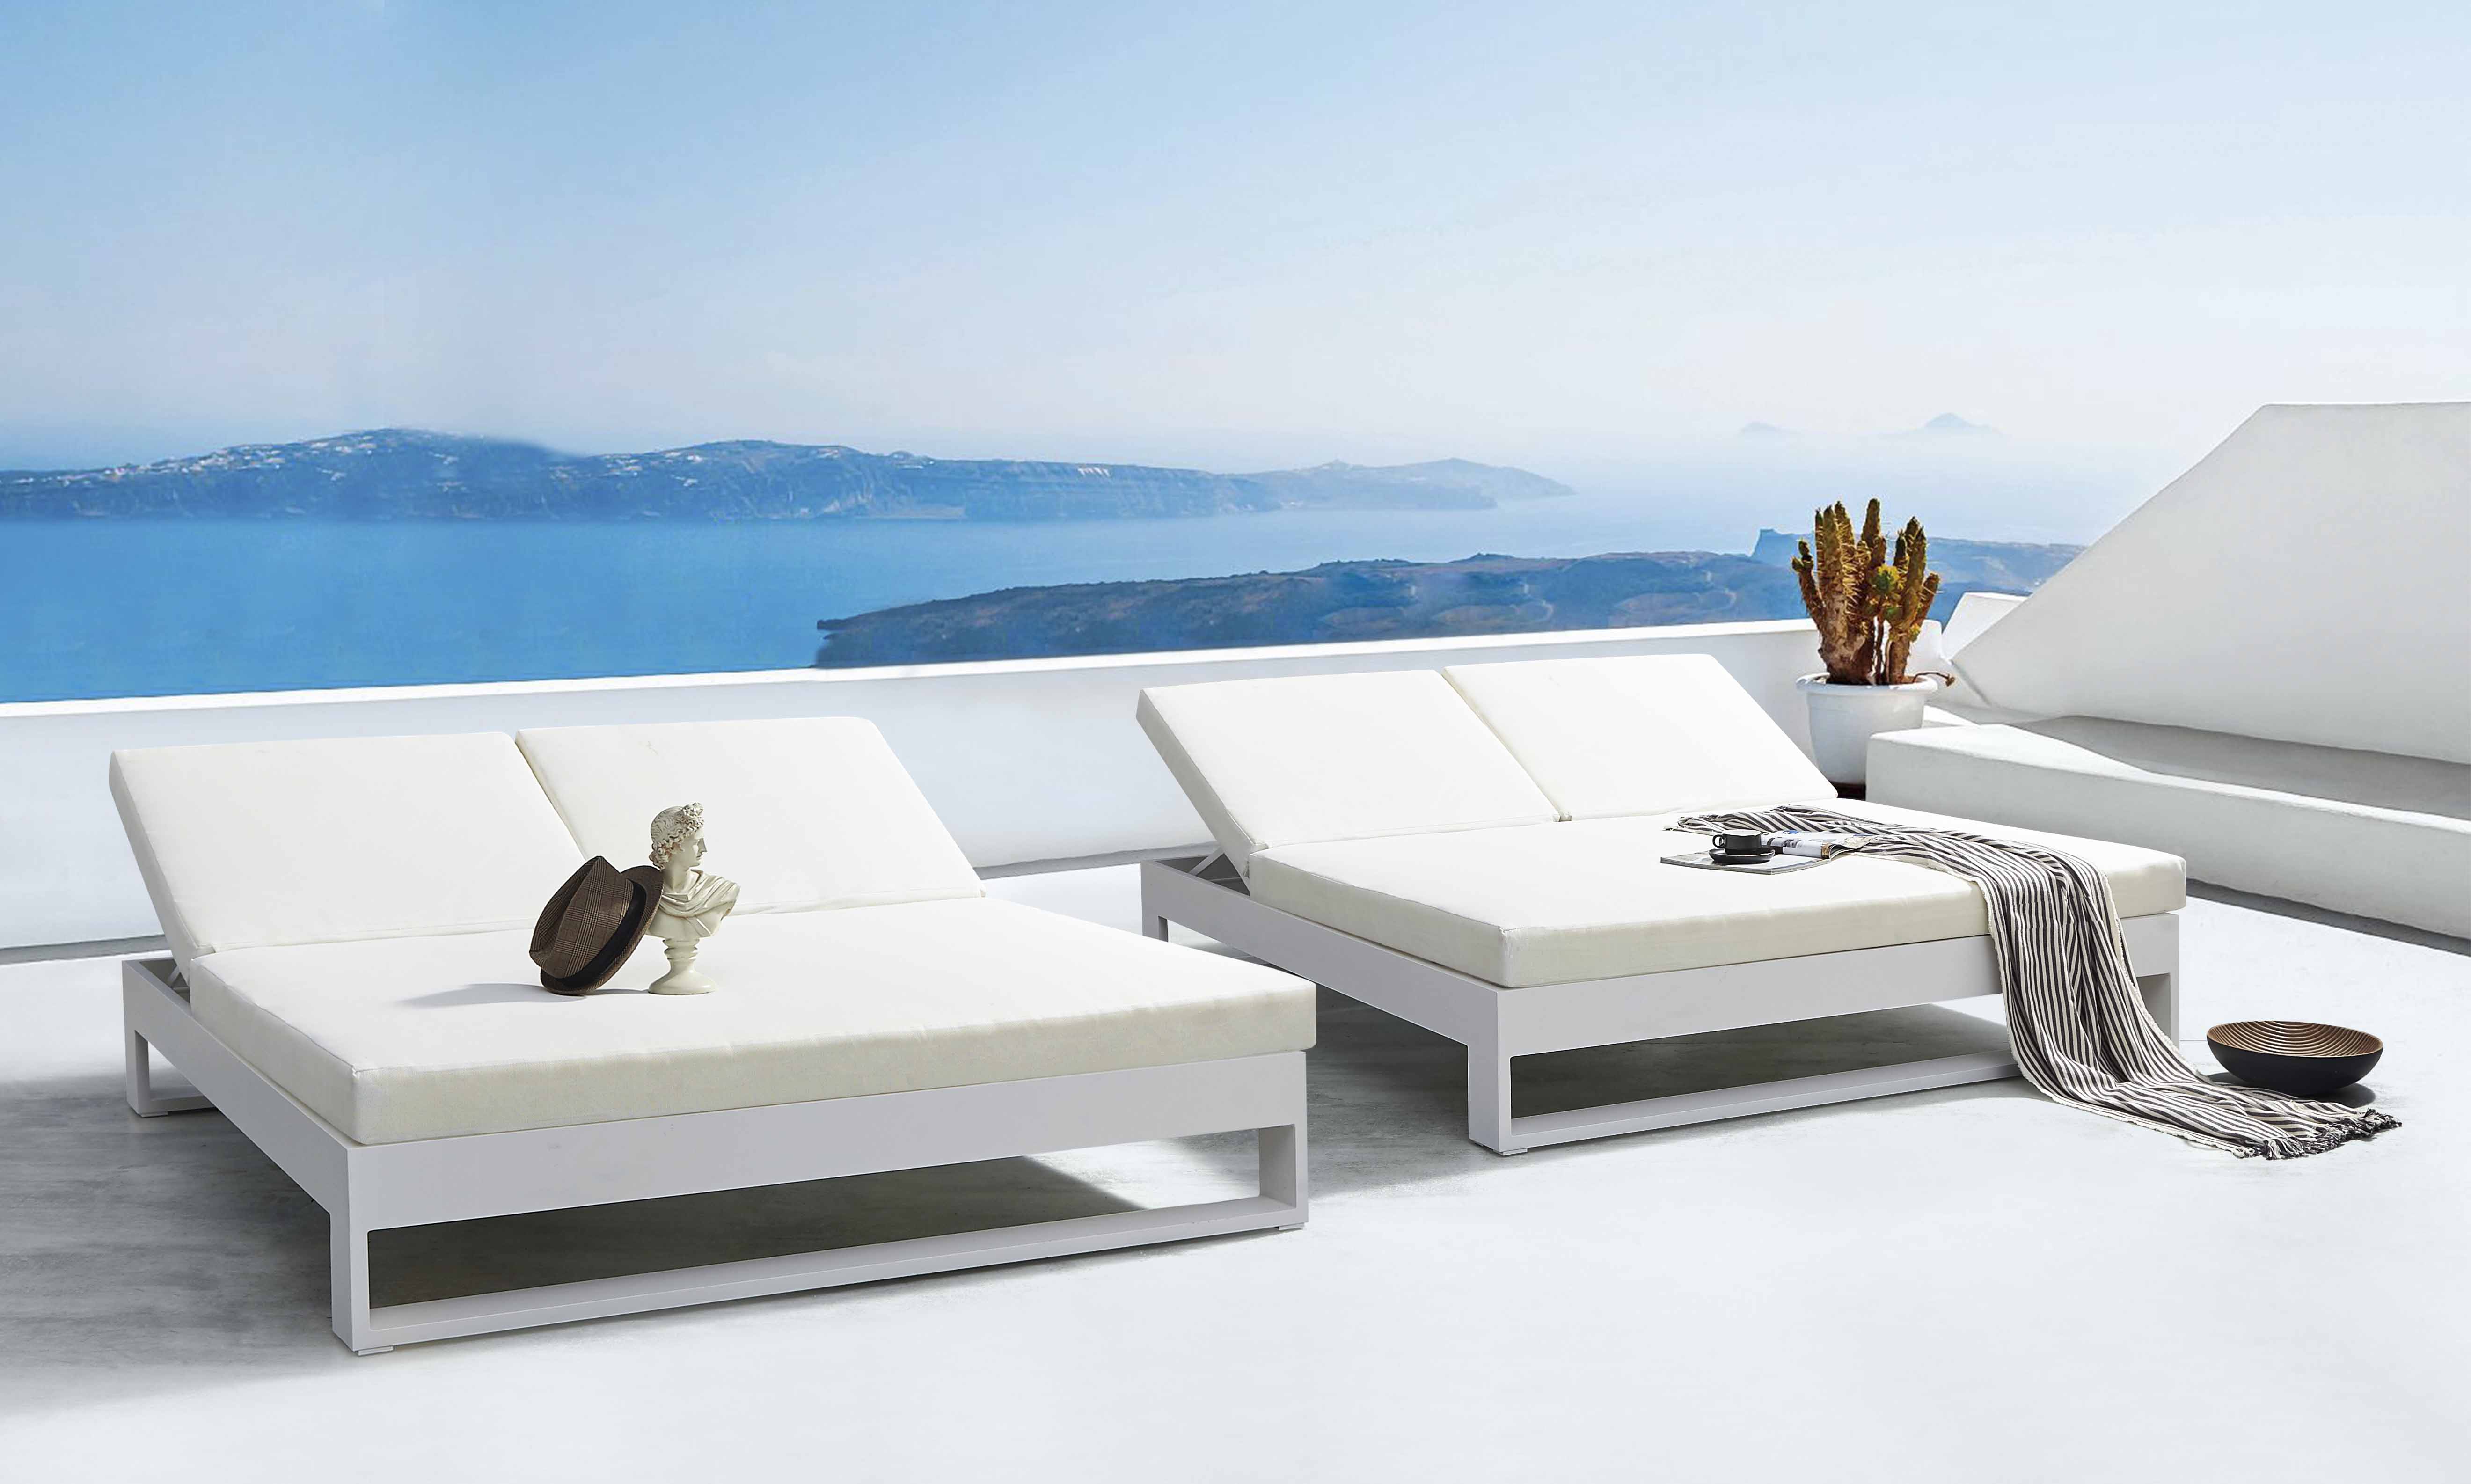 Golf kabini daybed S7